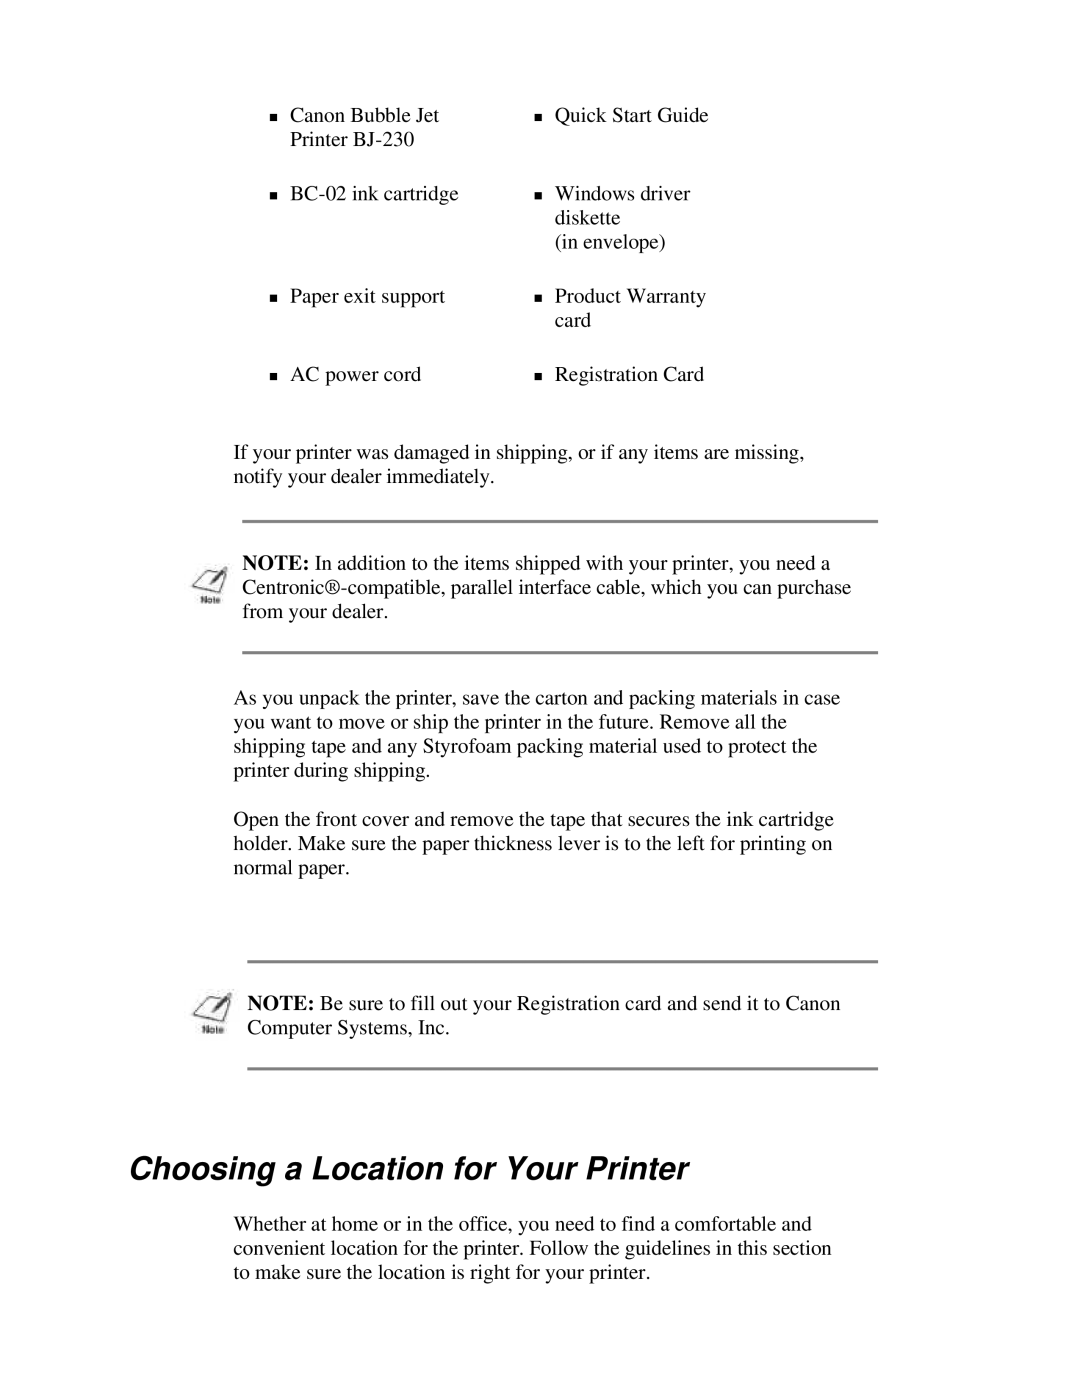 Canon BJ-230 user manual Choosing a Location for Your Printer 